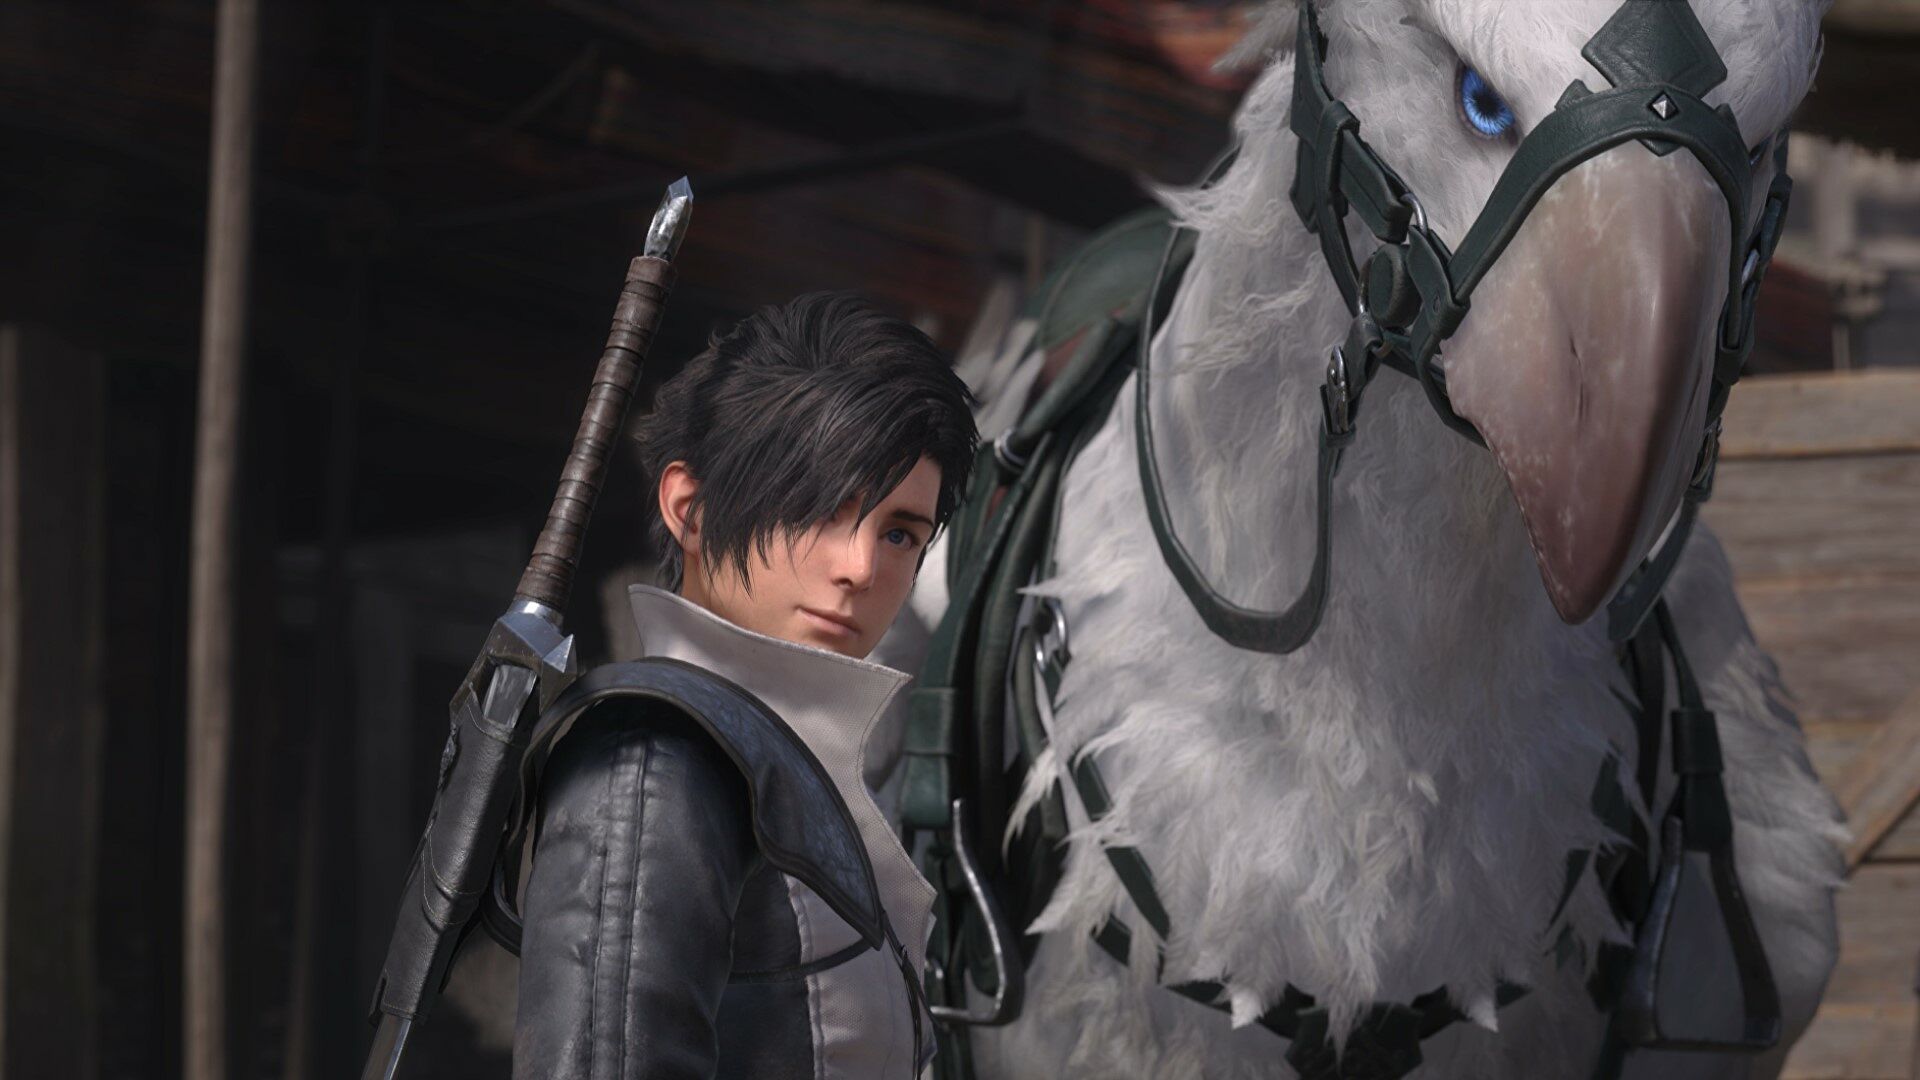 Final Fantasy 16’s producer said every wrong thing when asked about the game’s diversity